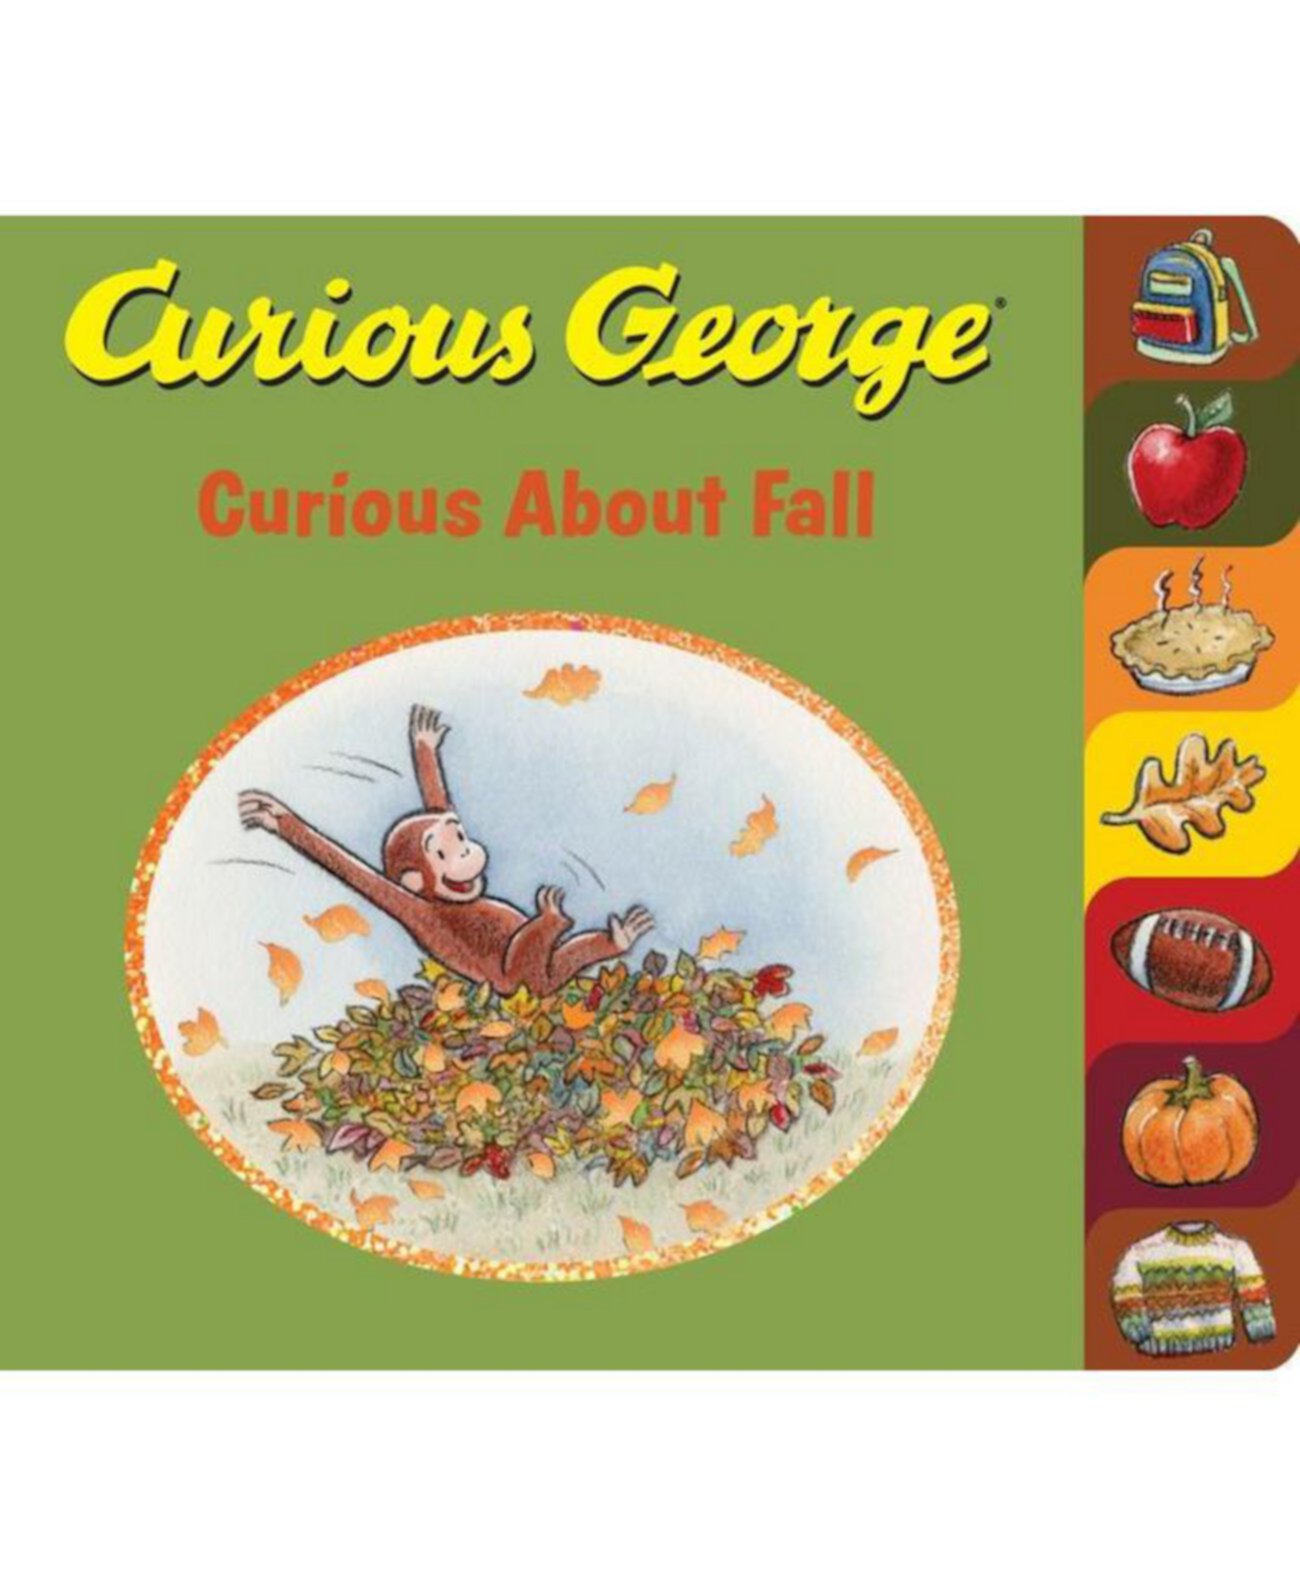 Curious George Curious About Fall Tabbed Board Book by H. A. Rey Barnes & Noble